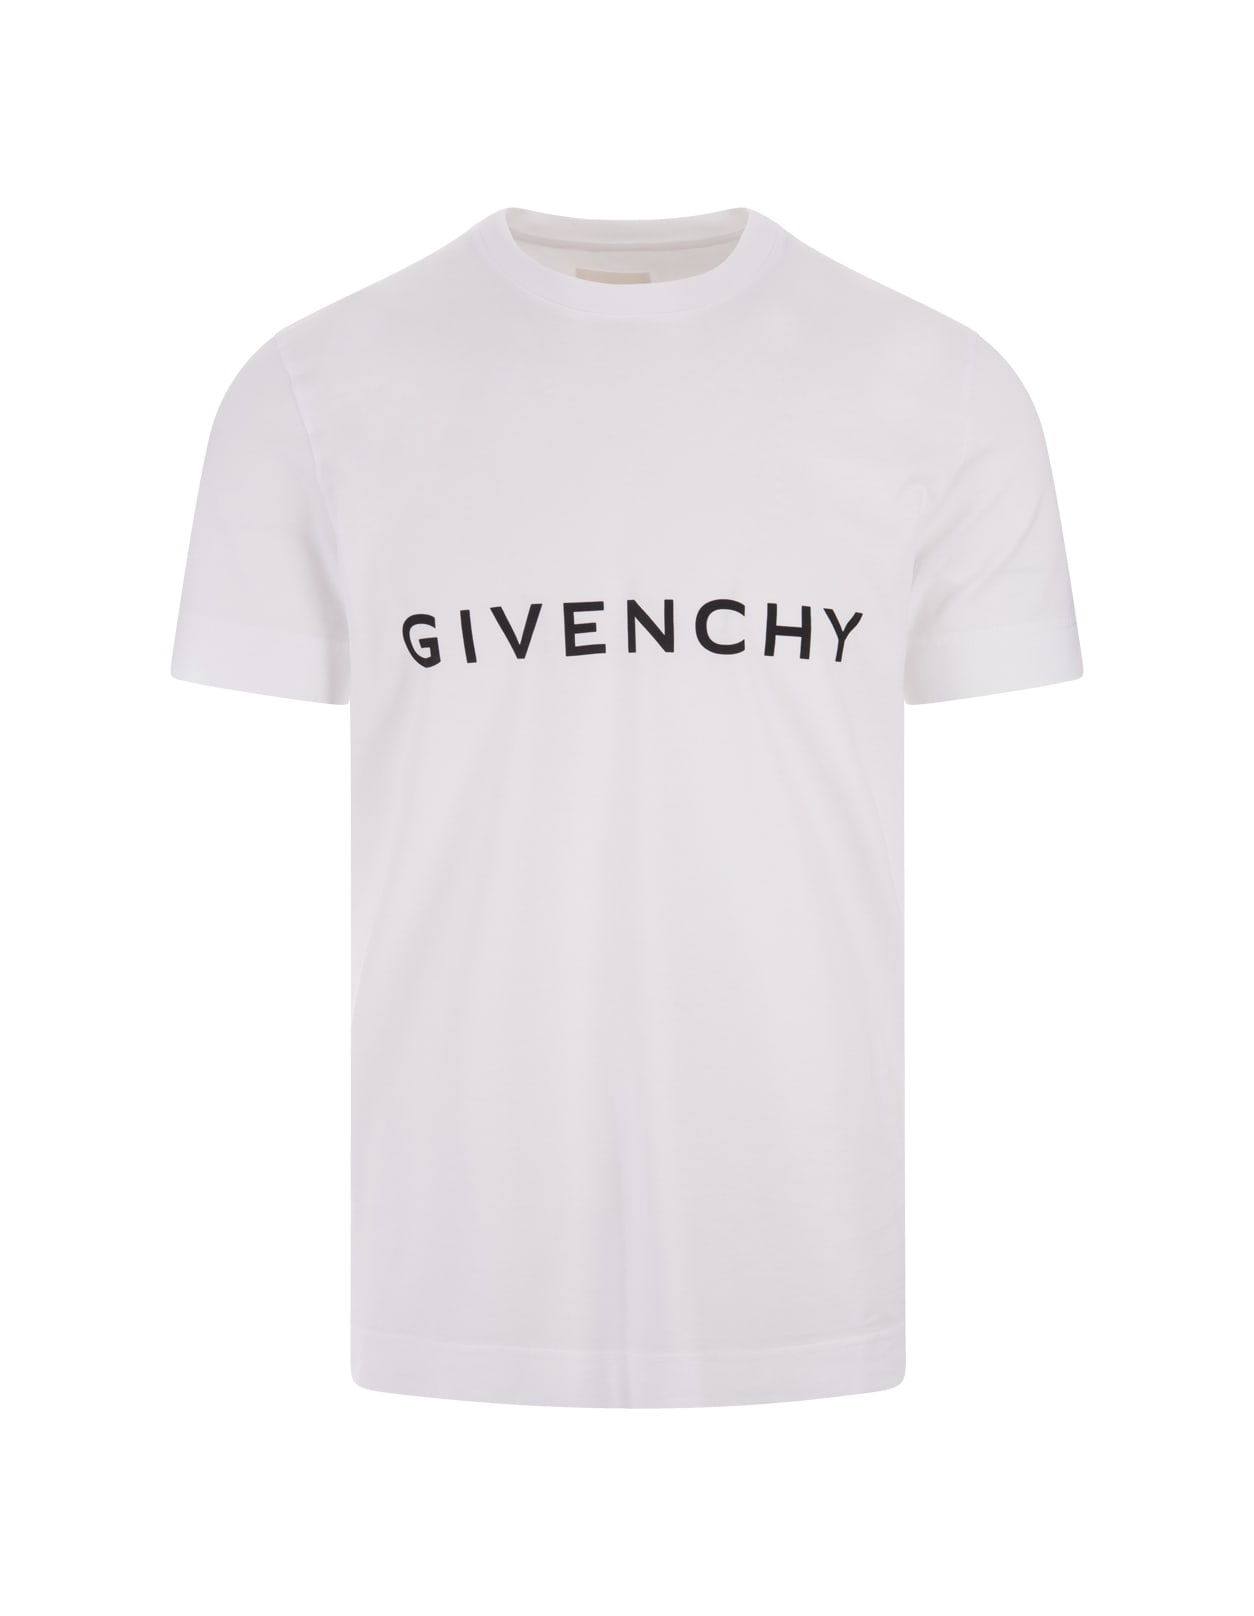 Givenchy White T-shirt With  Archetype Print On Front